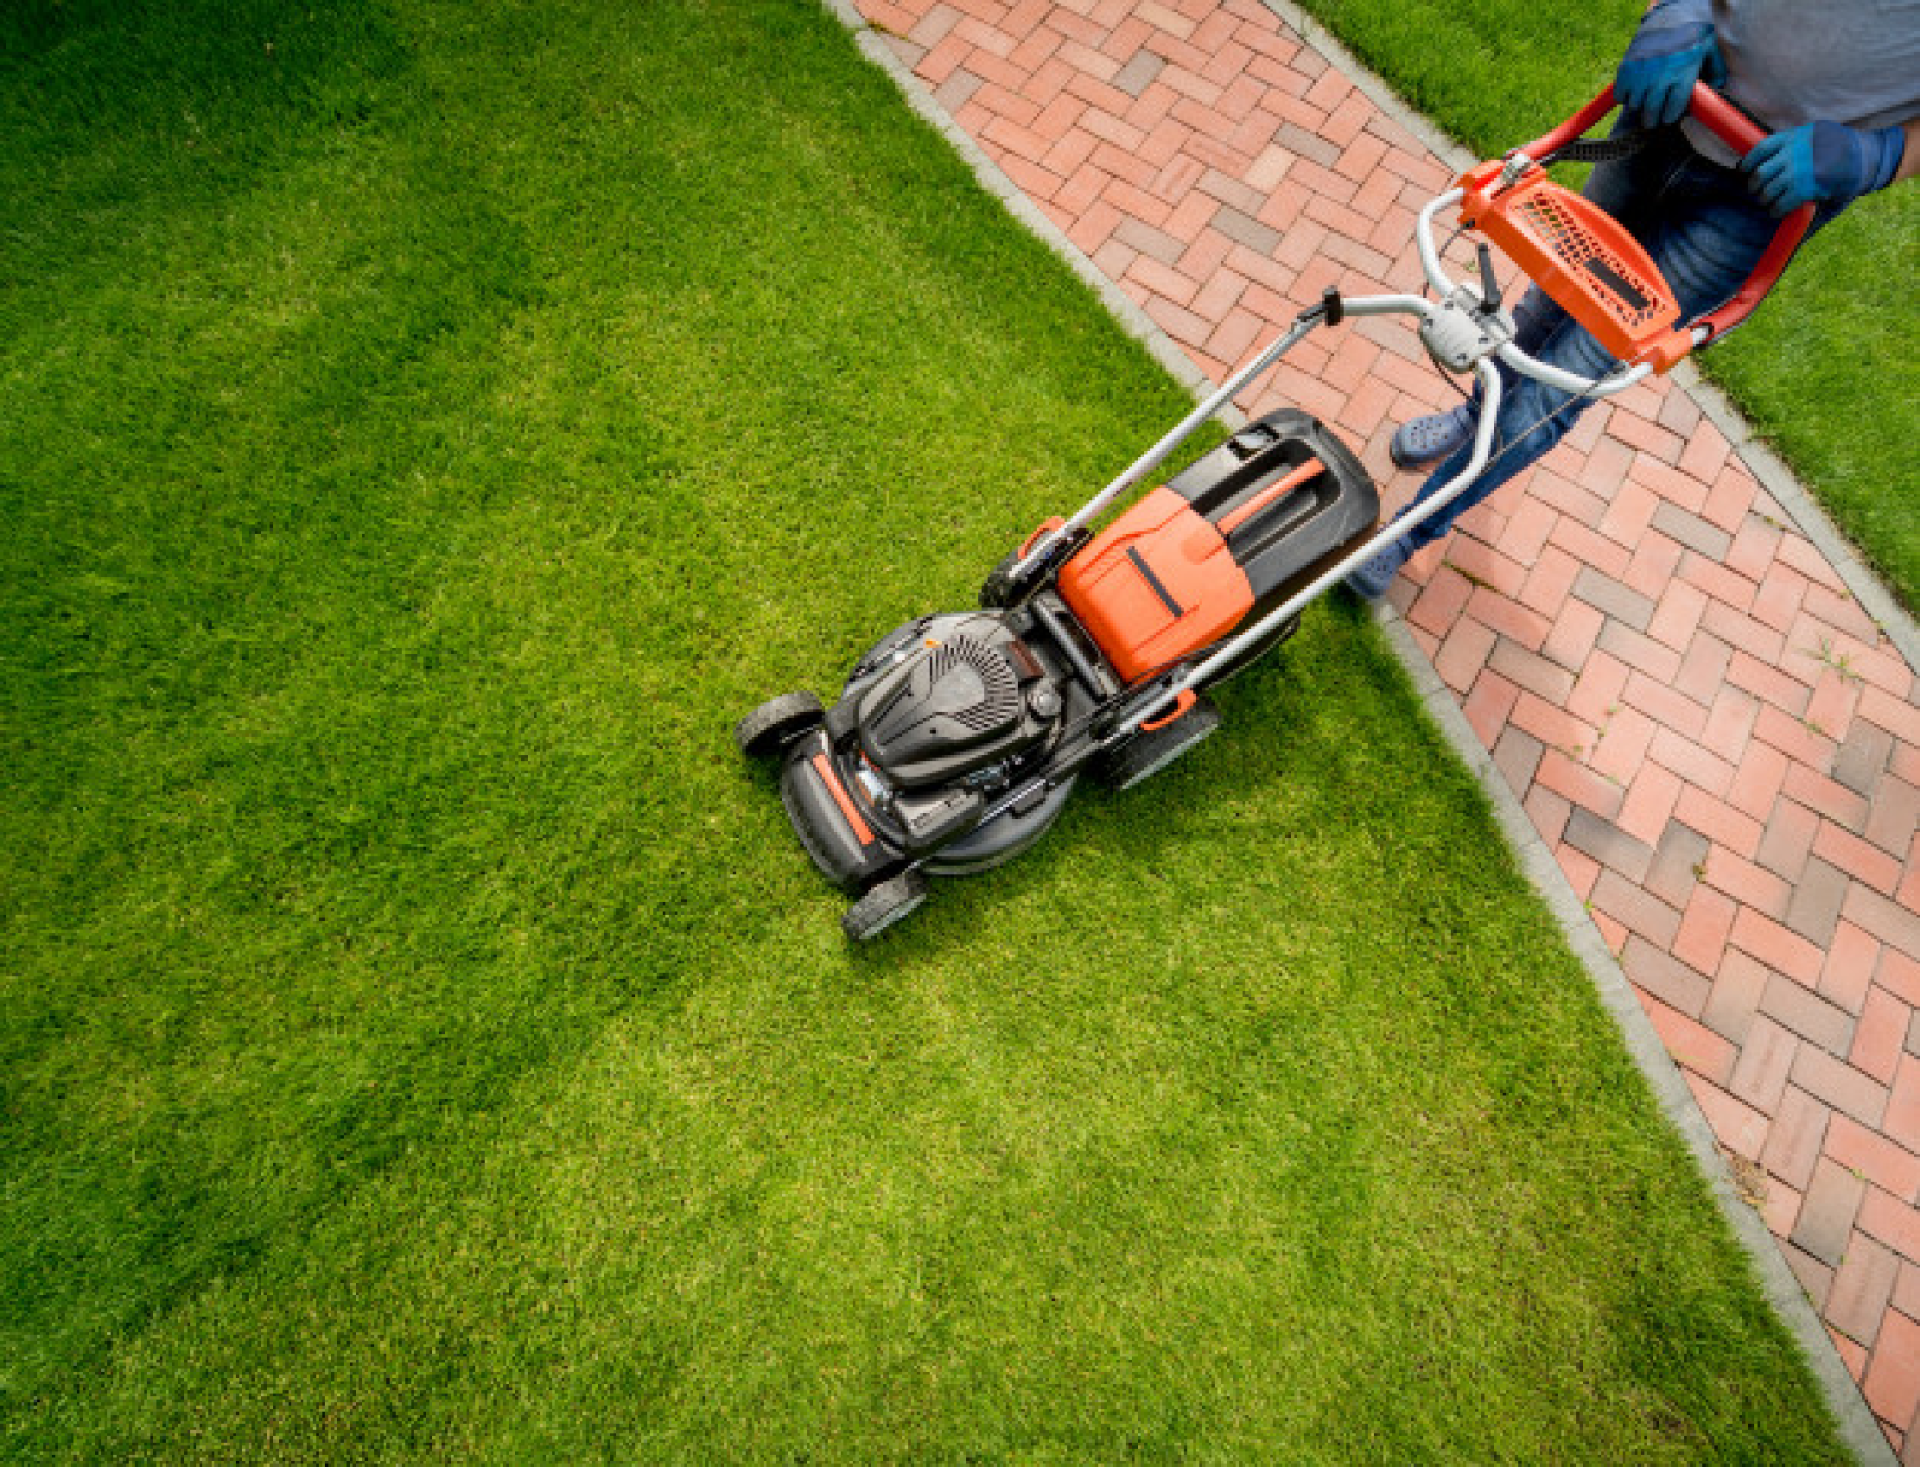 Choosing the Right Grass: A Guide to Grass Types and Ideal Mowing Practices with Green Lawns Solutions